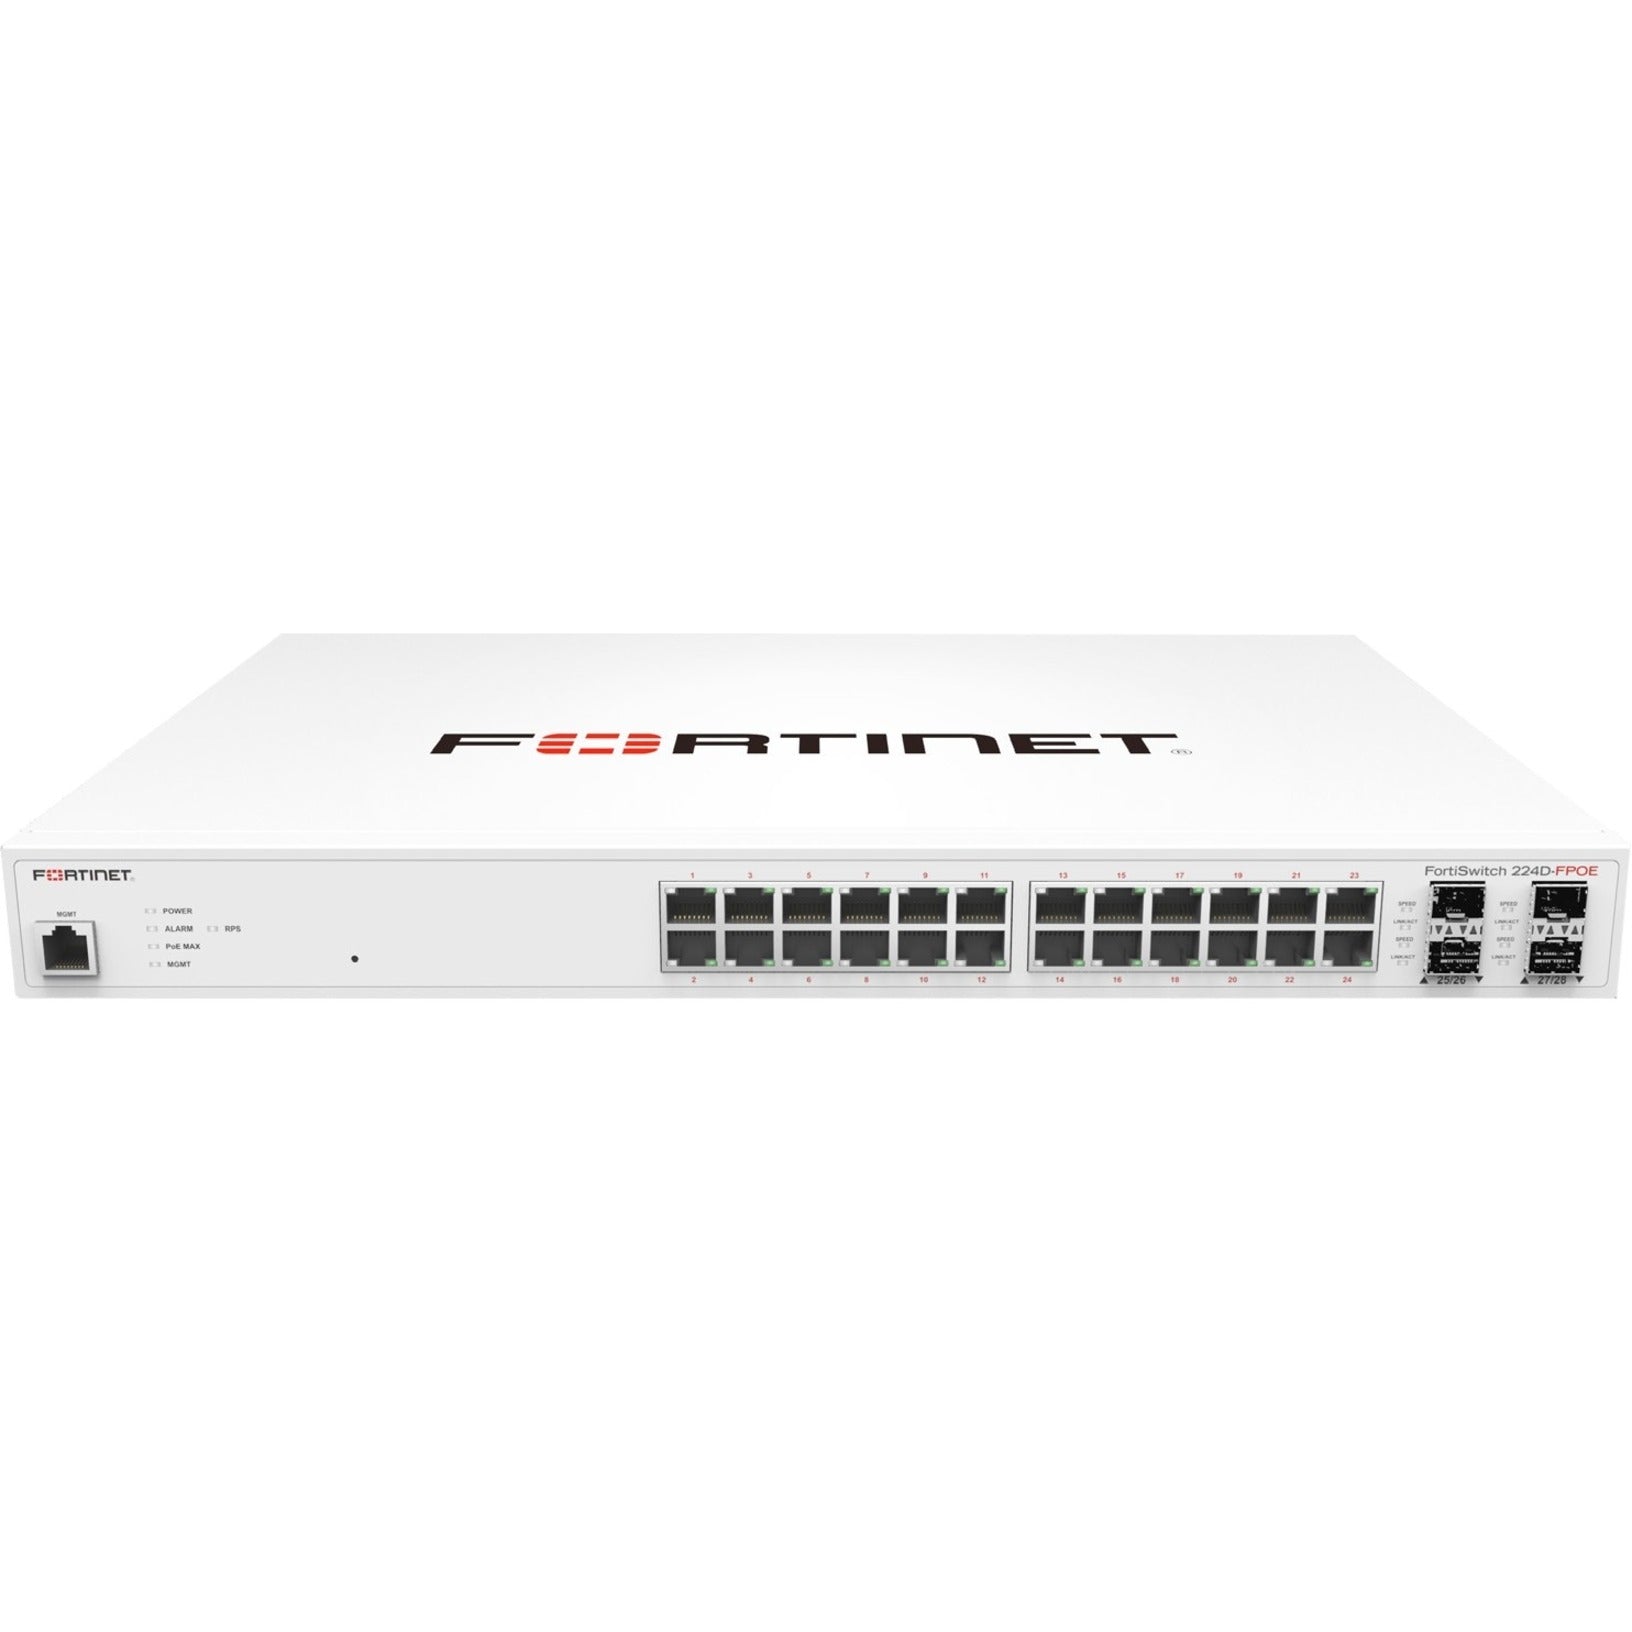 Fortinet FortiSwitch 224D-FPOE Ethernet Switch (FS-224D-FPOE)